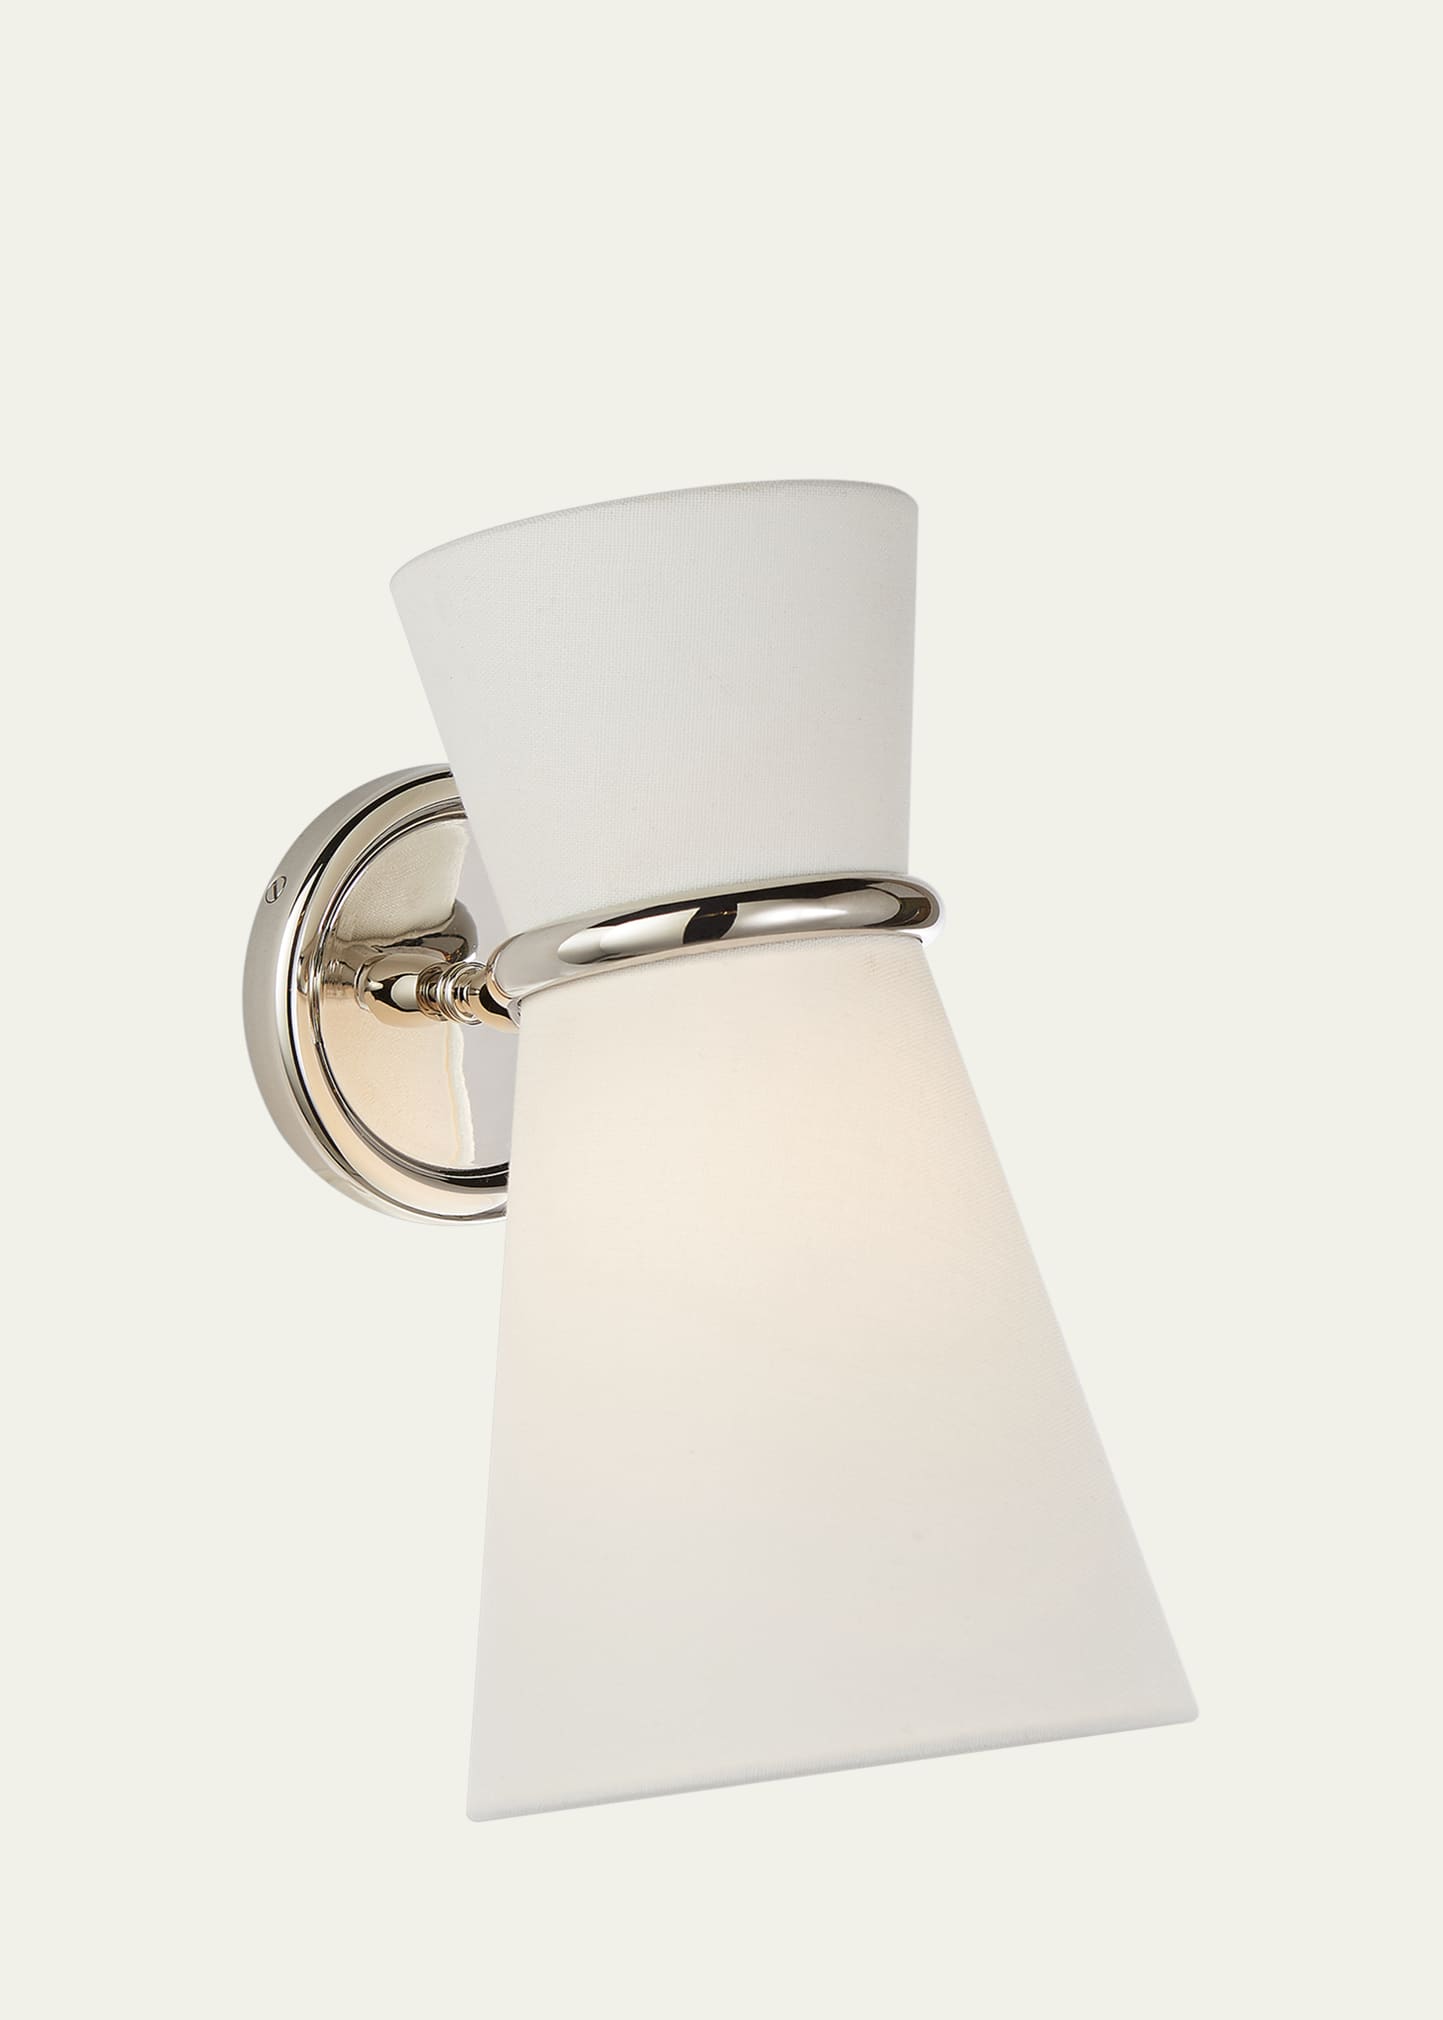 Clarkson Small Single Pivoting Sconce By Aerin